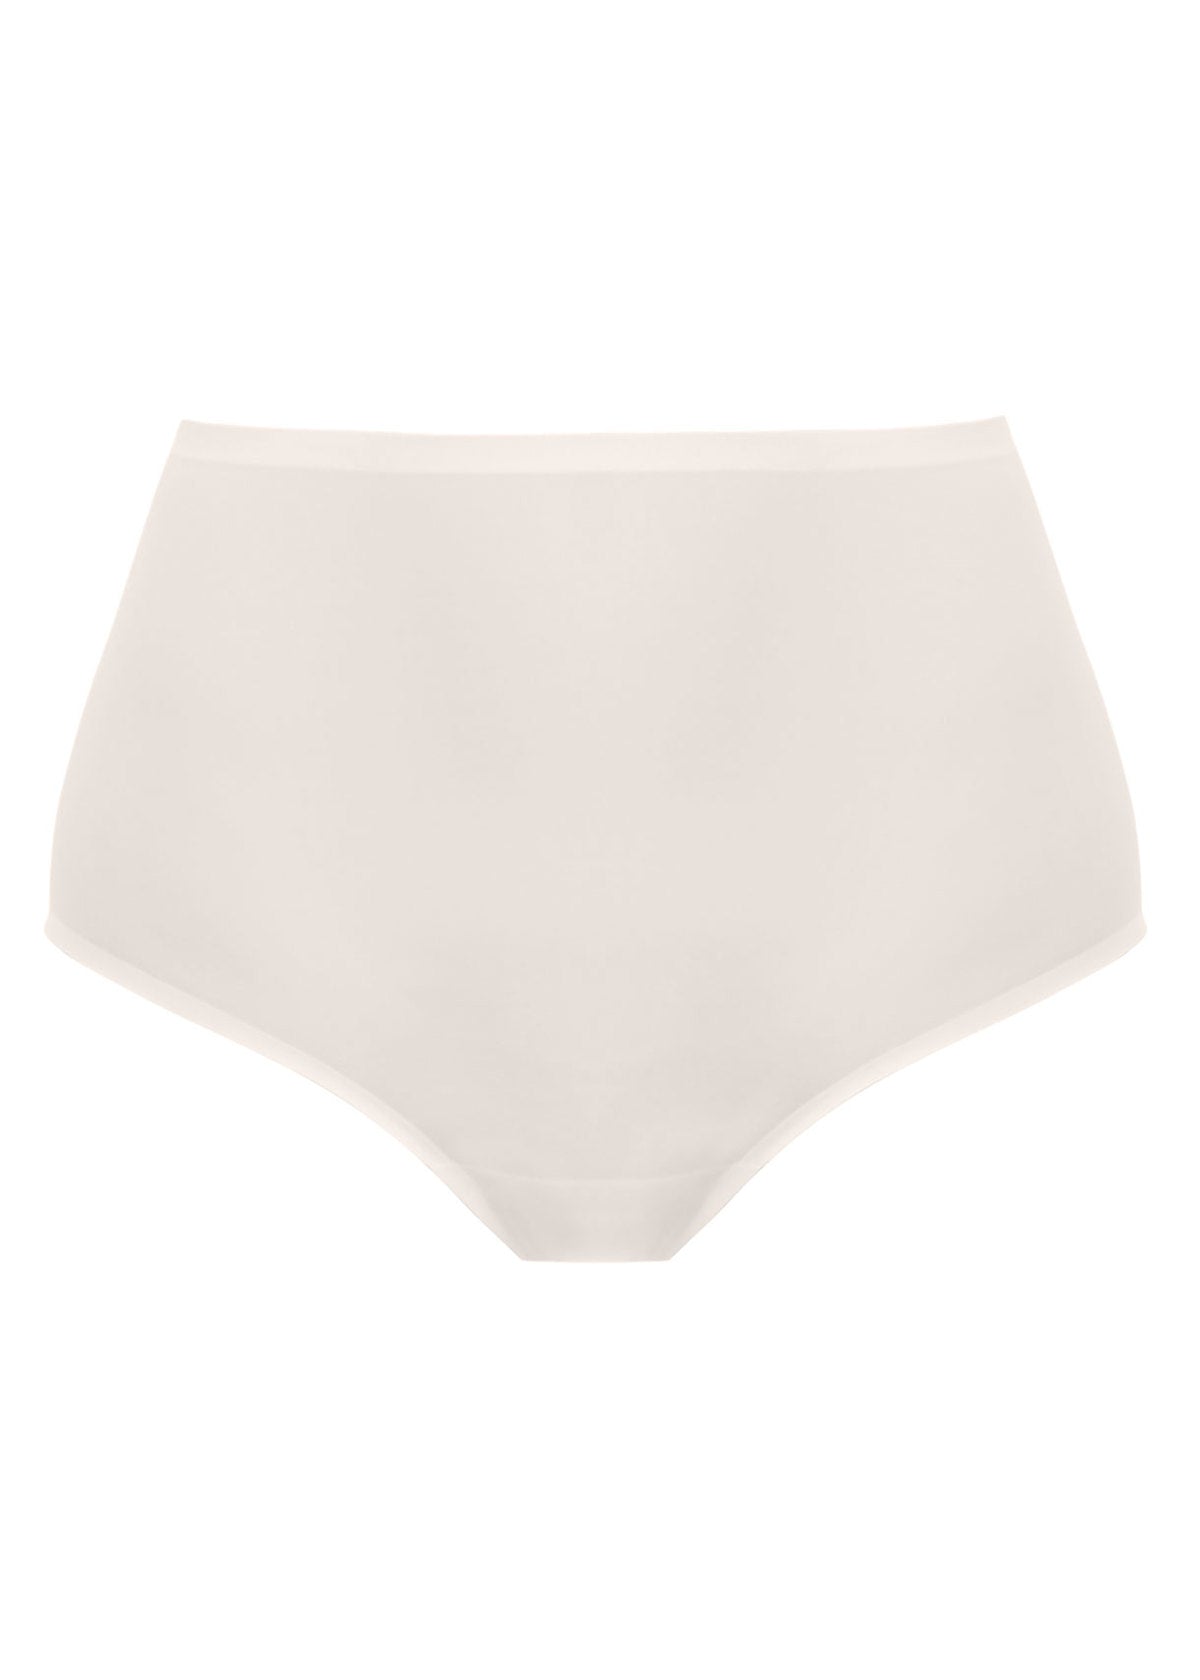 Smoothease Full Brief One Size Ivory front view